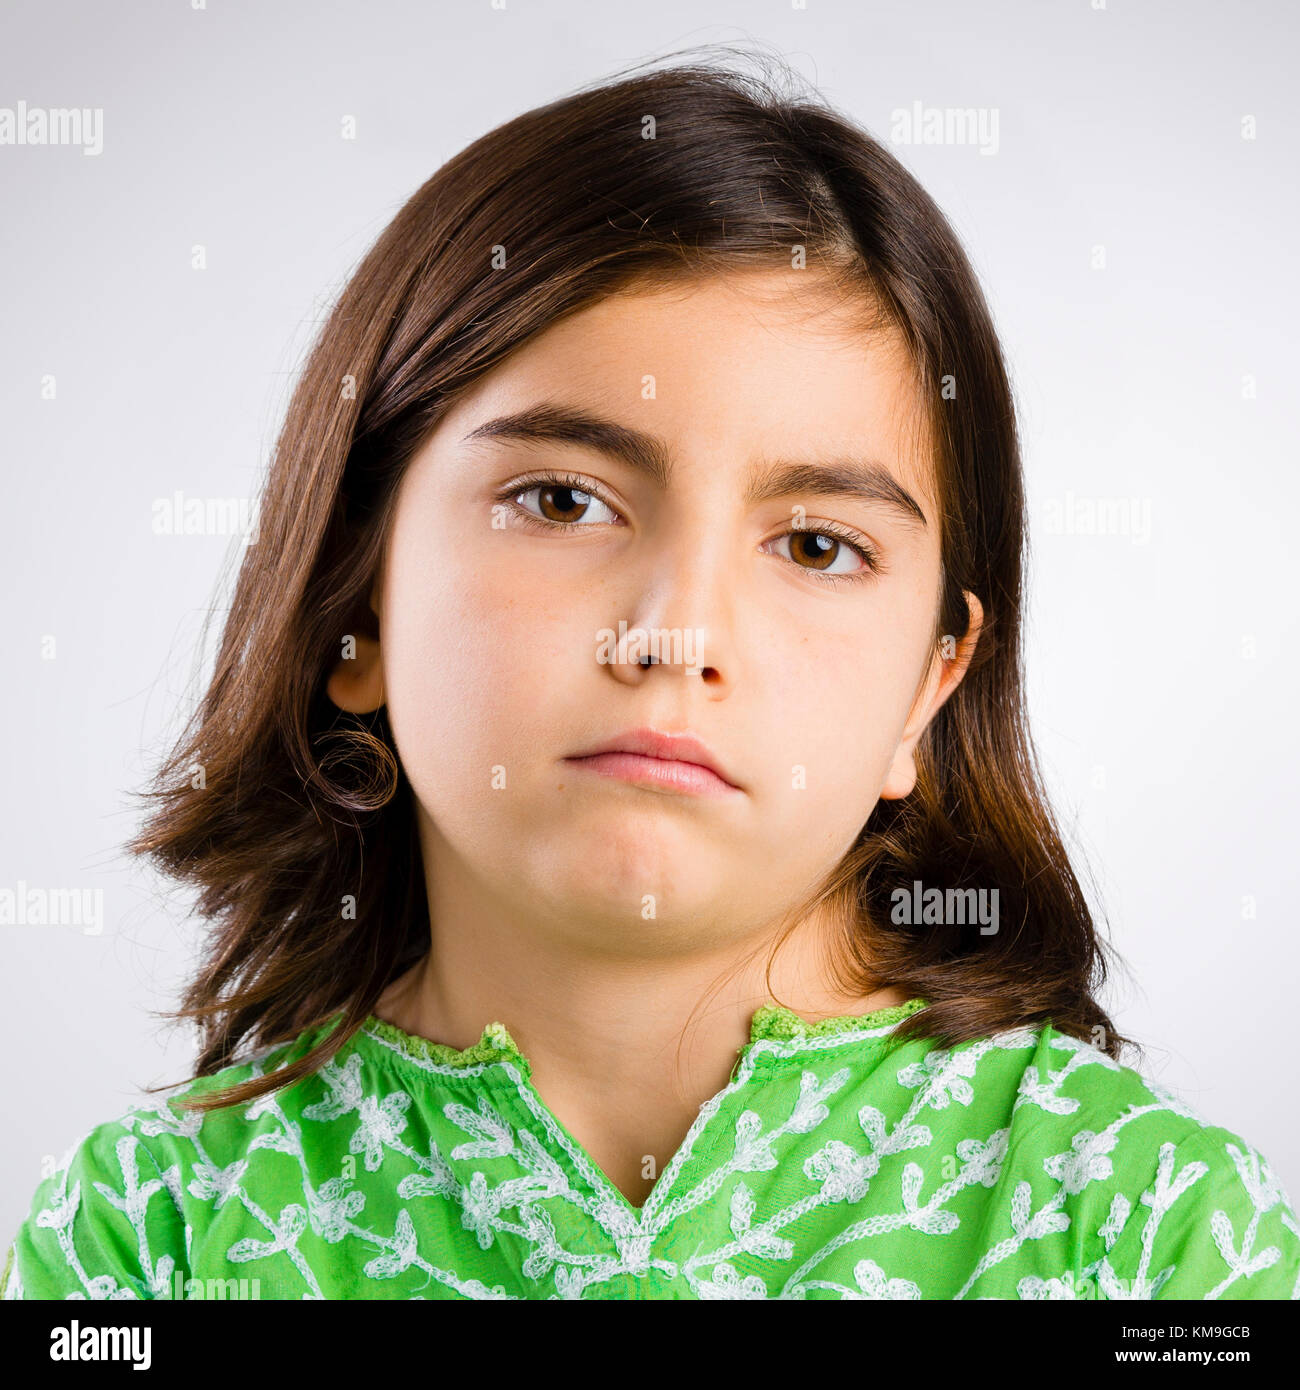 Portrait of a little girl making a serious expression Stock Photo